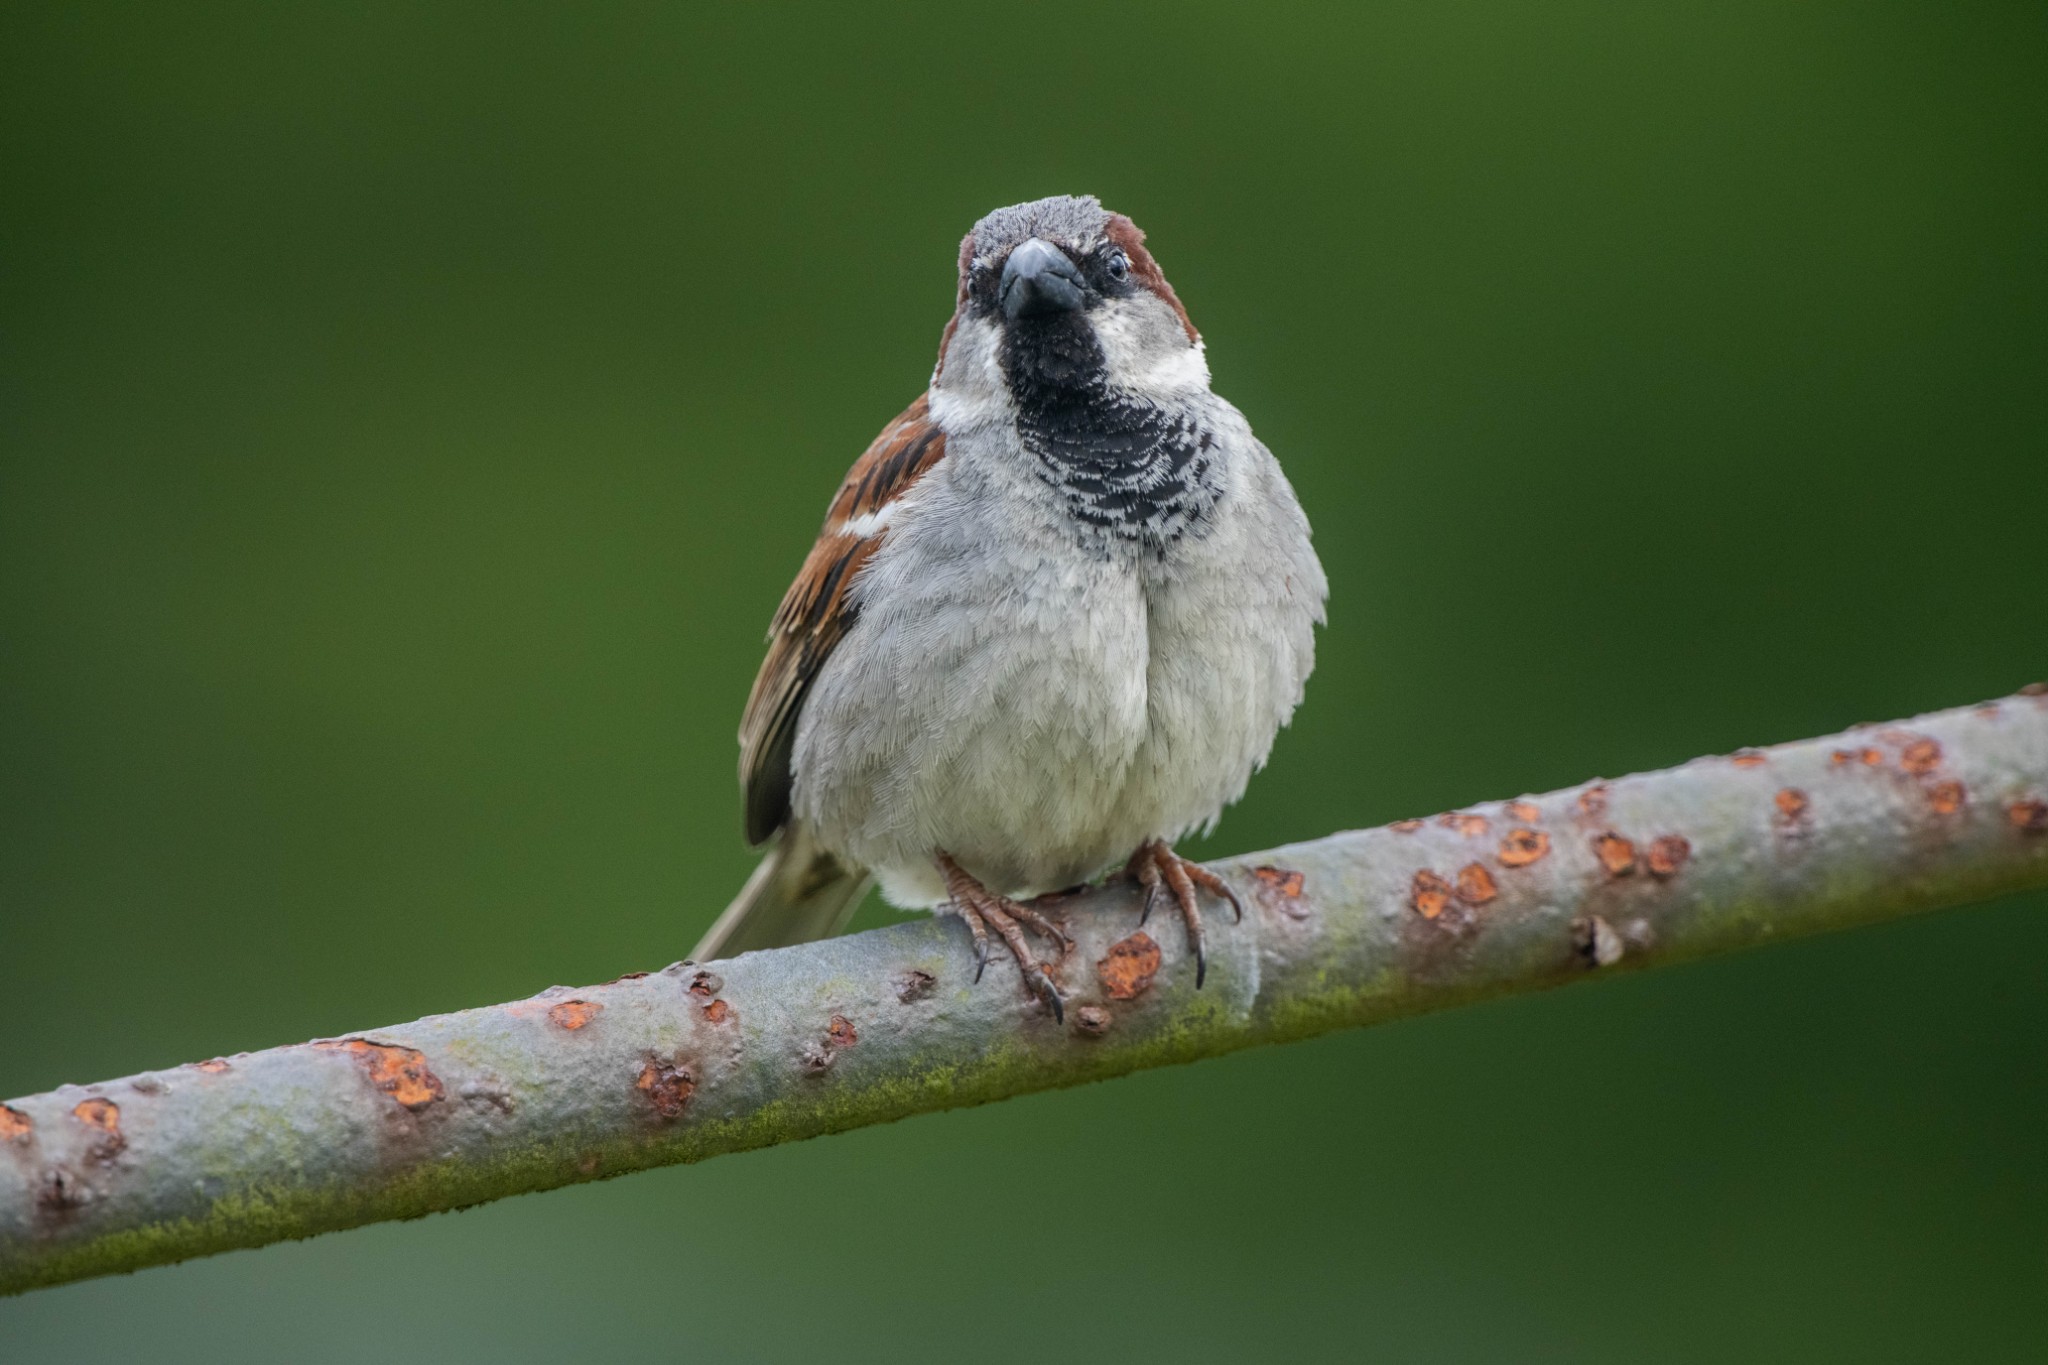 House sparrow - image by Raymond Besant